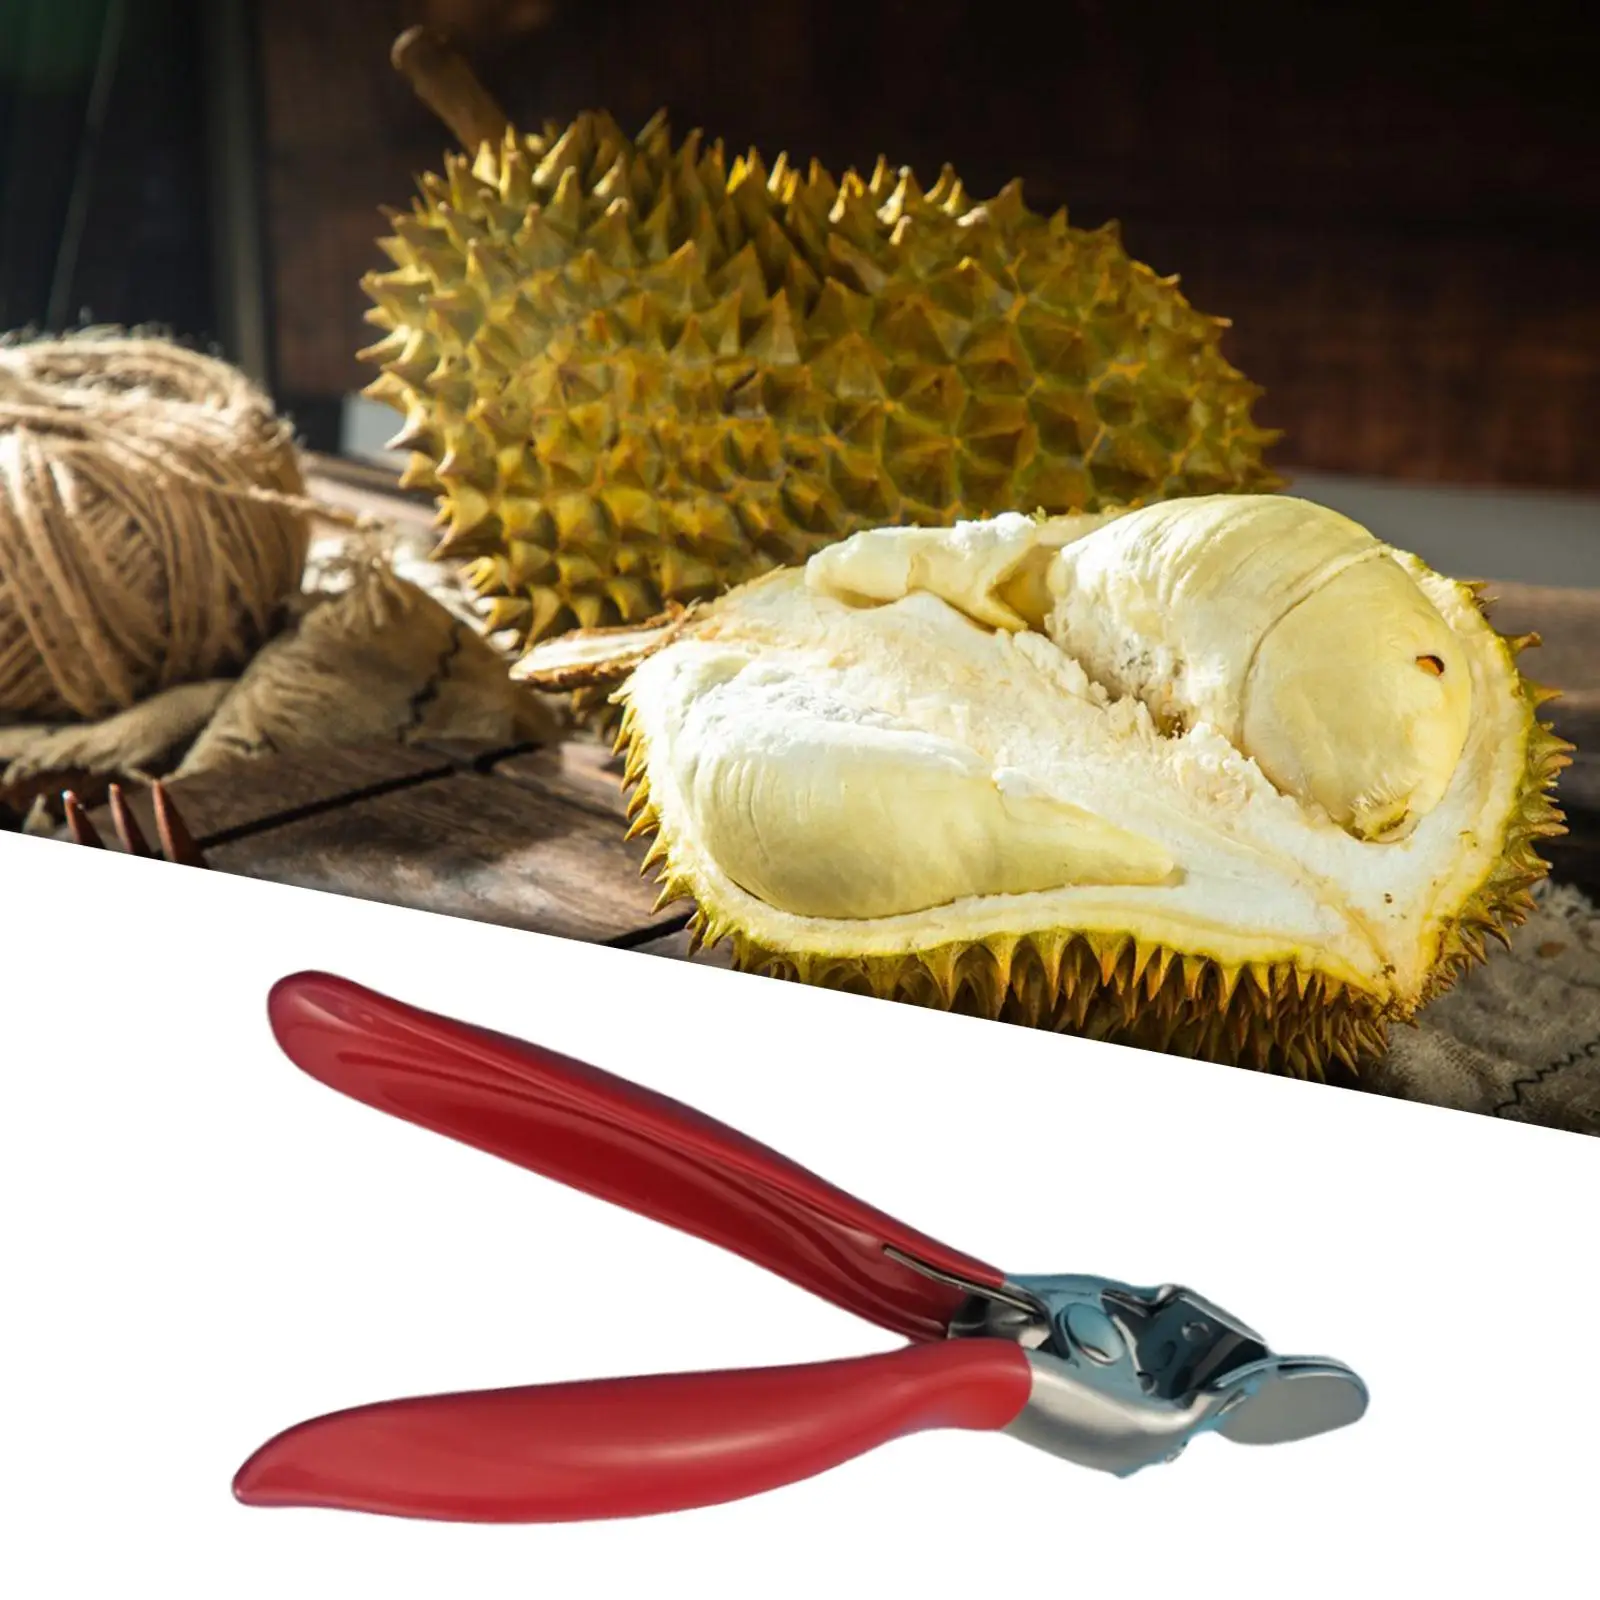 Durian Peel Breaking Tool PP Handle Food Grade Save Labors Manual Durian Shelling Machine for Kitchen Gift Durian Lovers Grocery